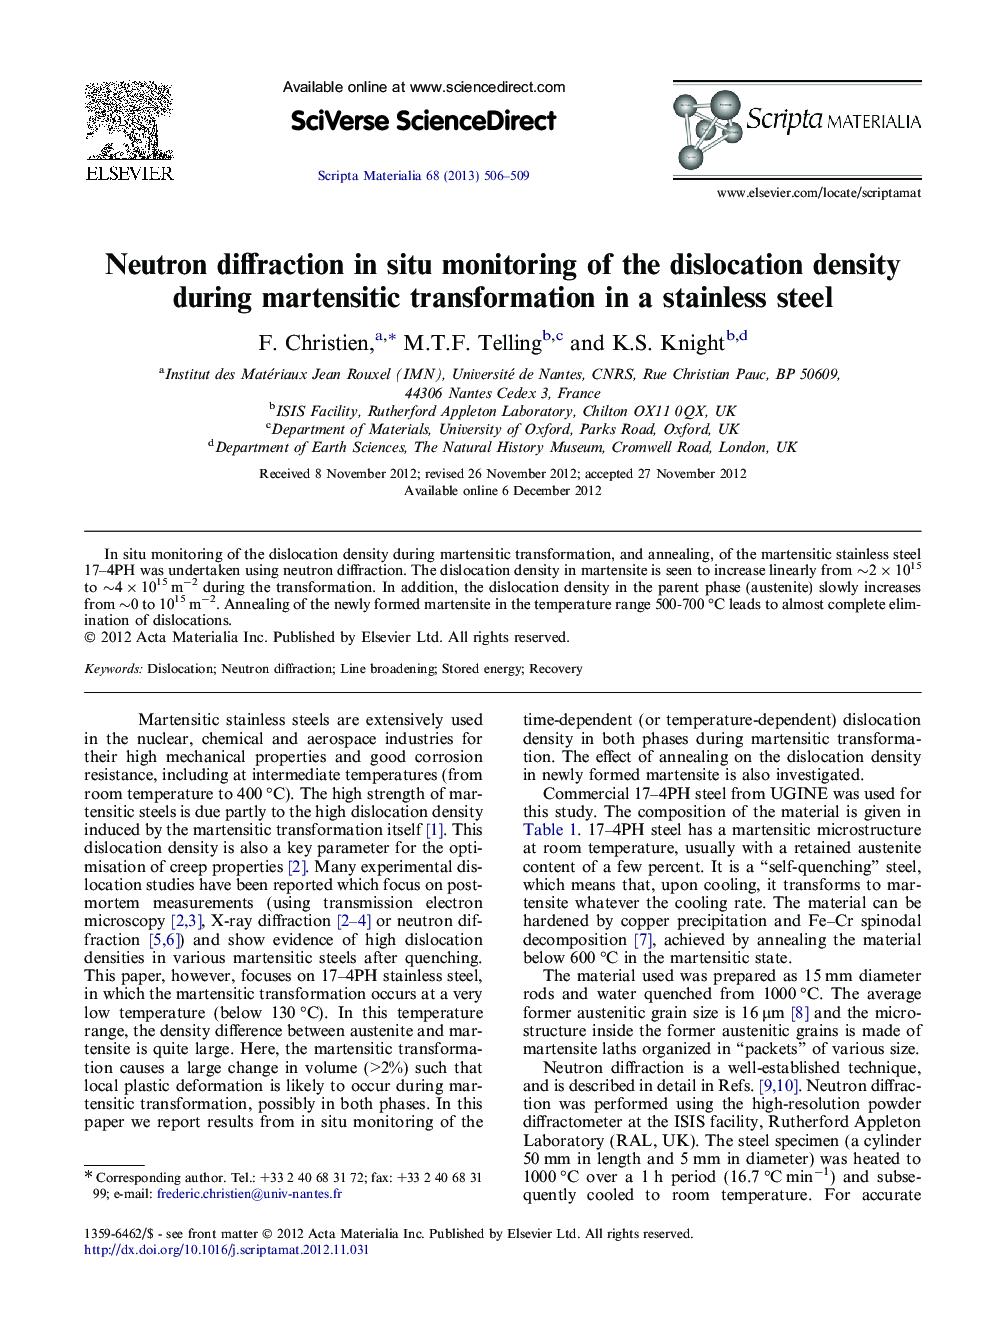 Neutron diffraction in situ monitoring of the dislocation density during martensitic transformation in a stainless steel